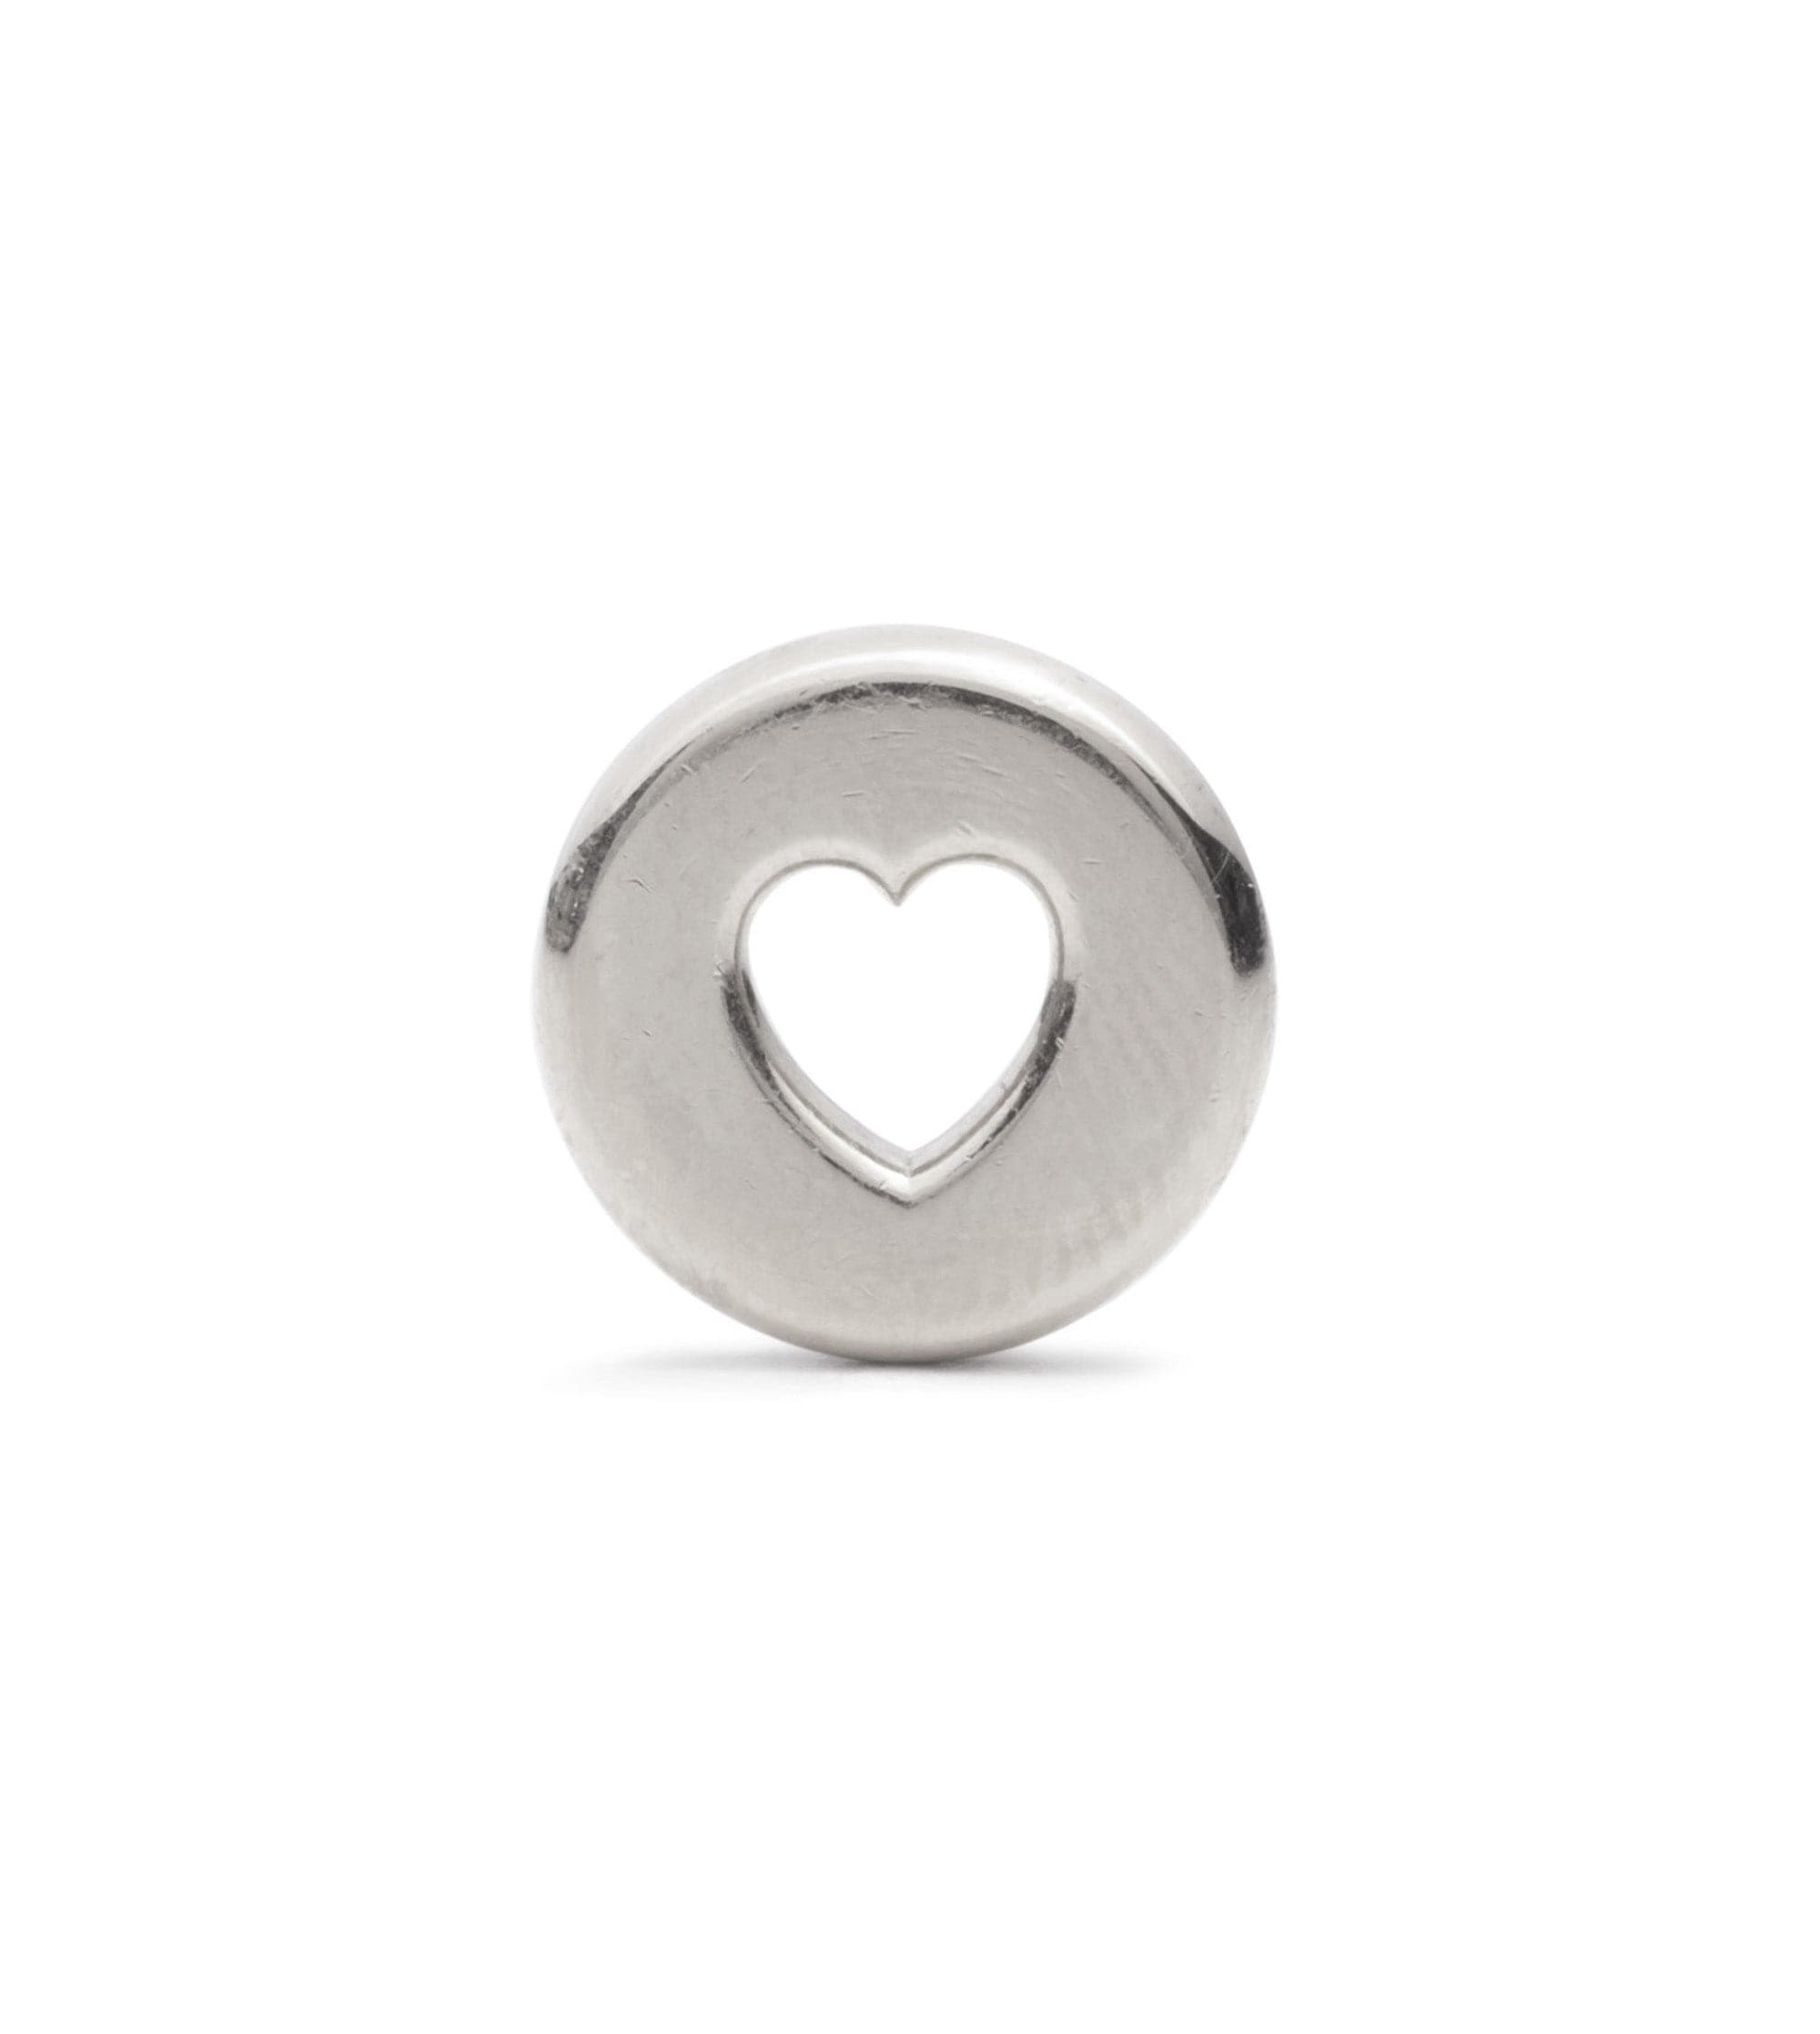 Love : Large White Gold Heart Beat